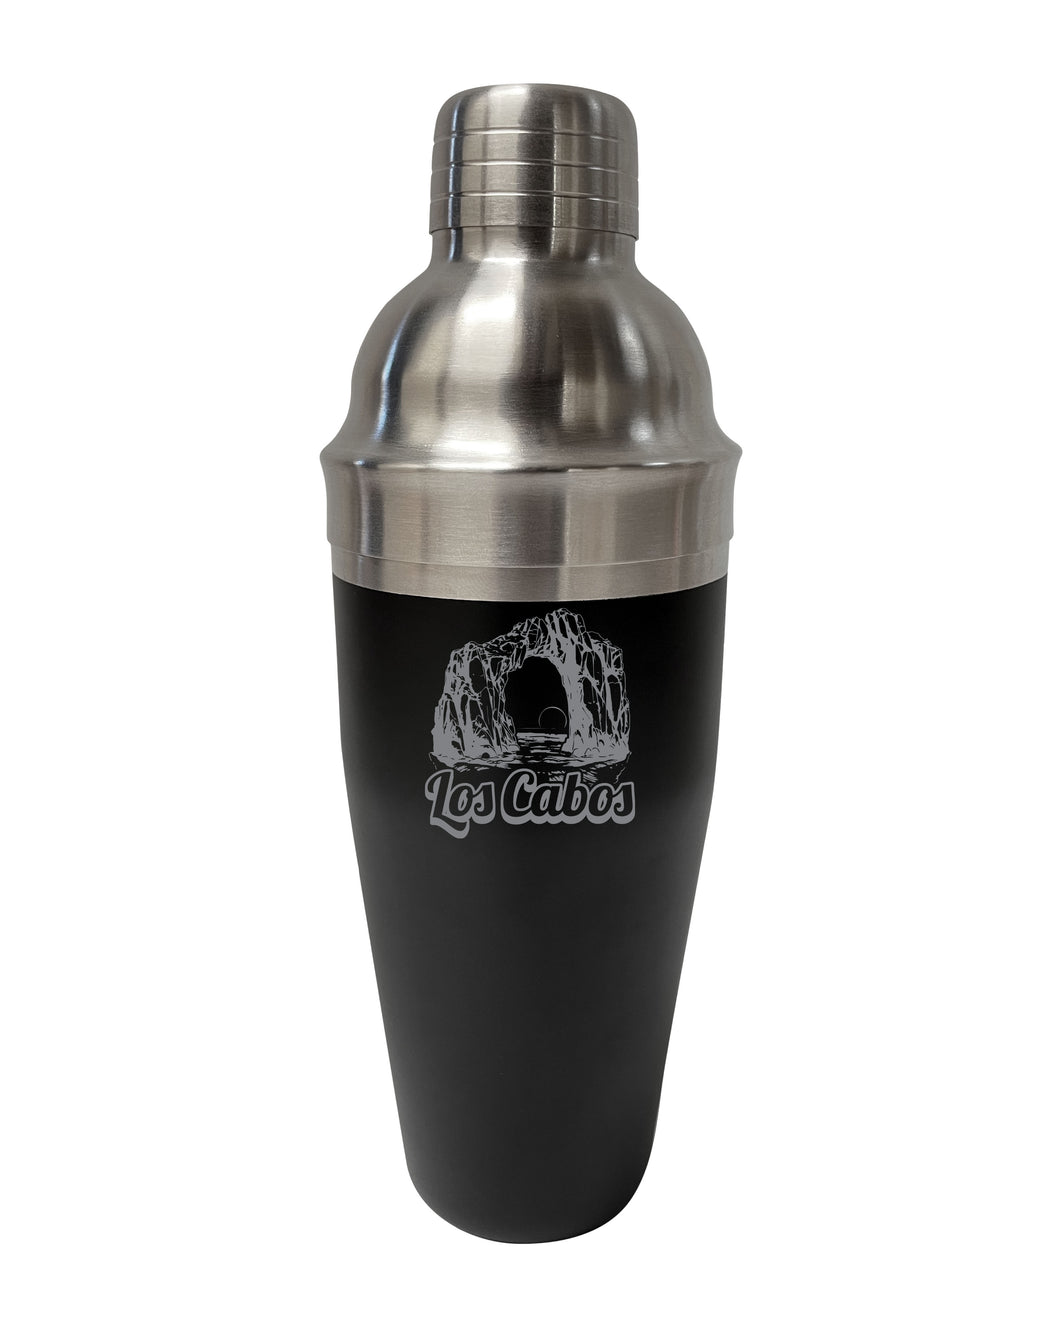 Los Cabos Mexico Souvenir 24 oz Engraved Stainless Steel Cocktail Shaker Black